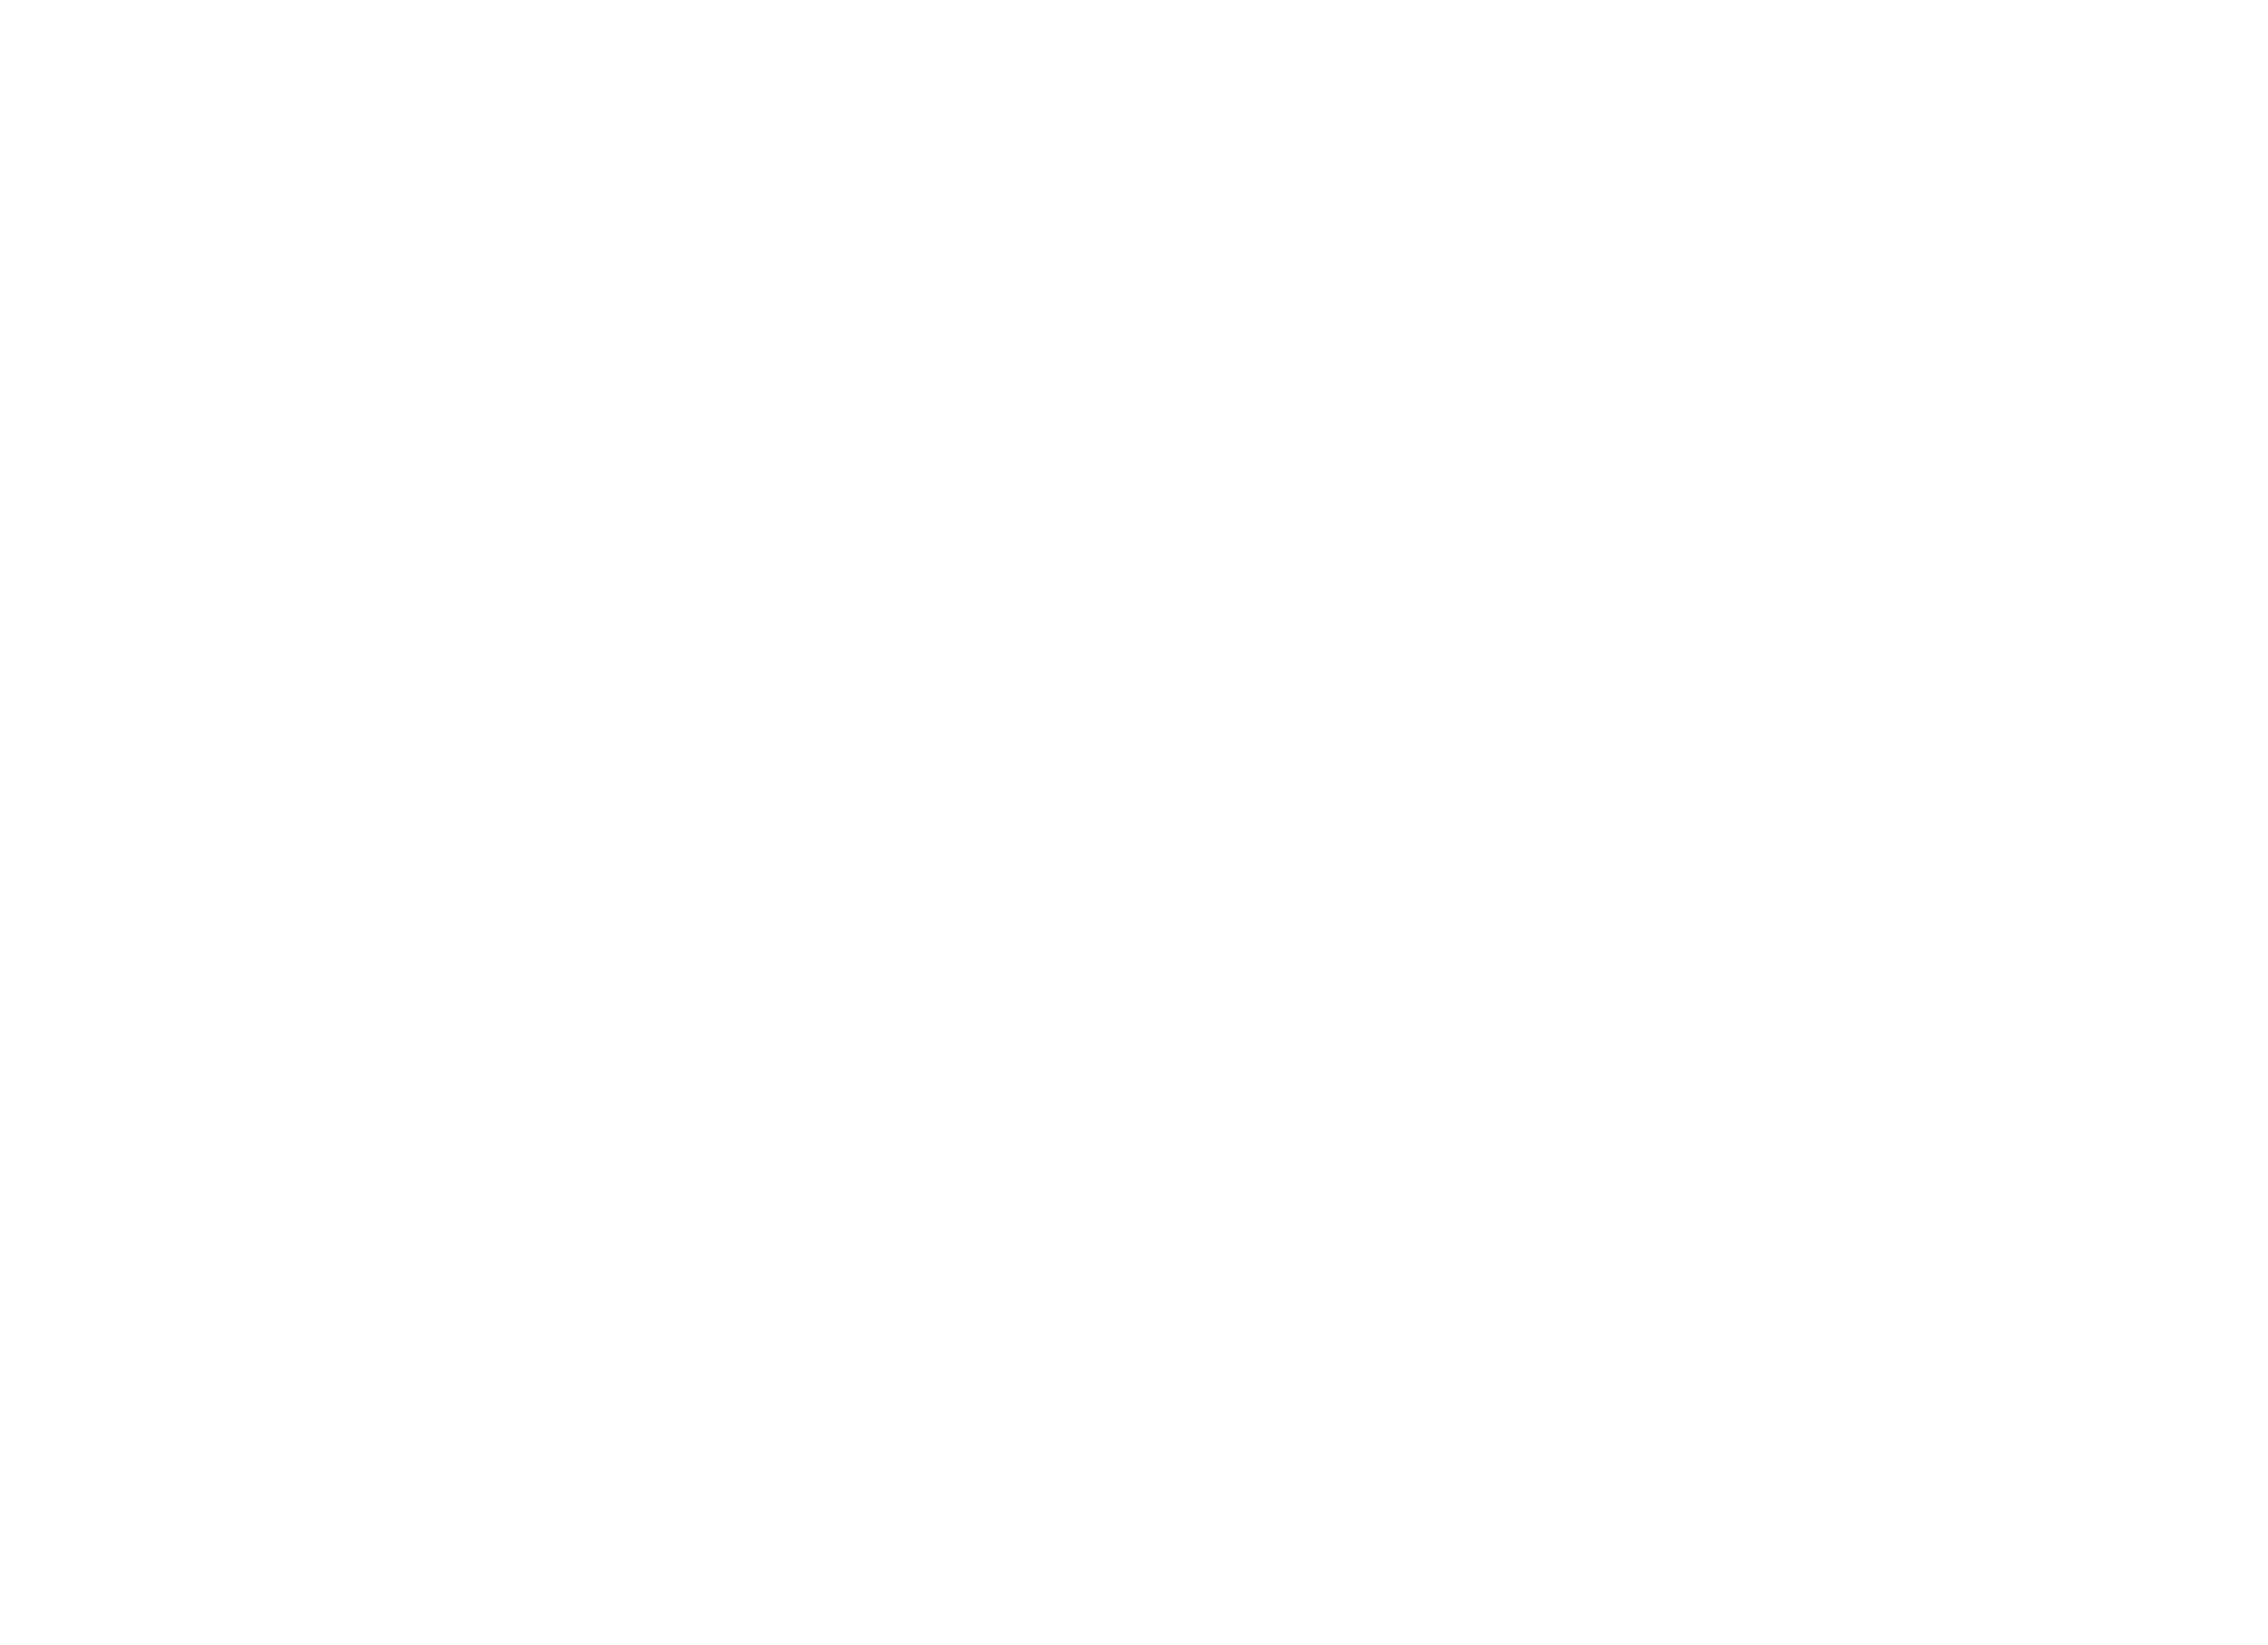 Plan-S.events